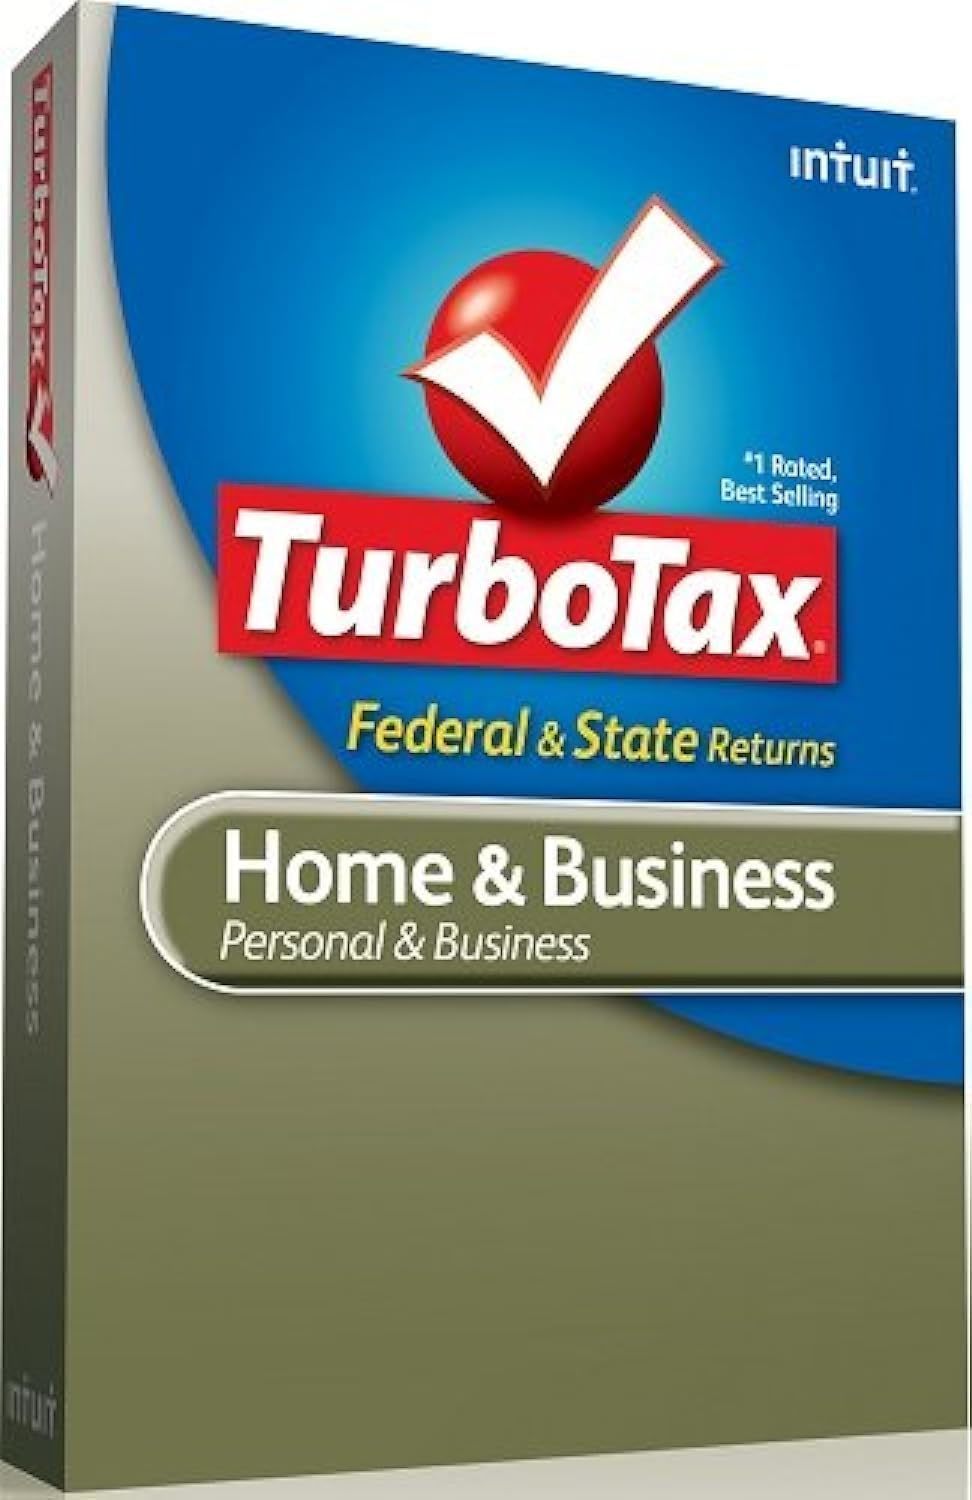 TurboTax Home & Business Federal + E-file + State 2011 [Old Version] - $64.23